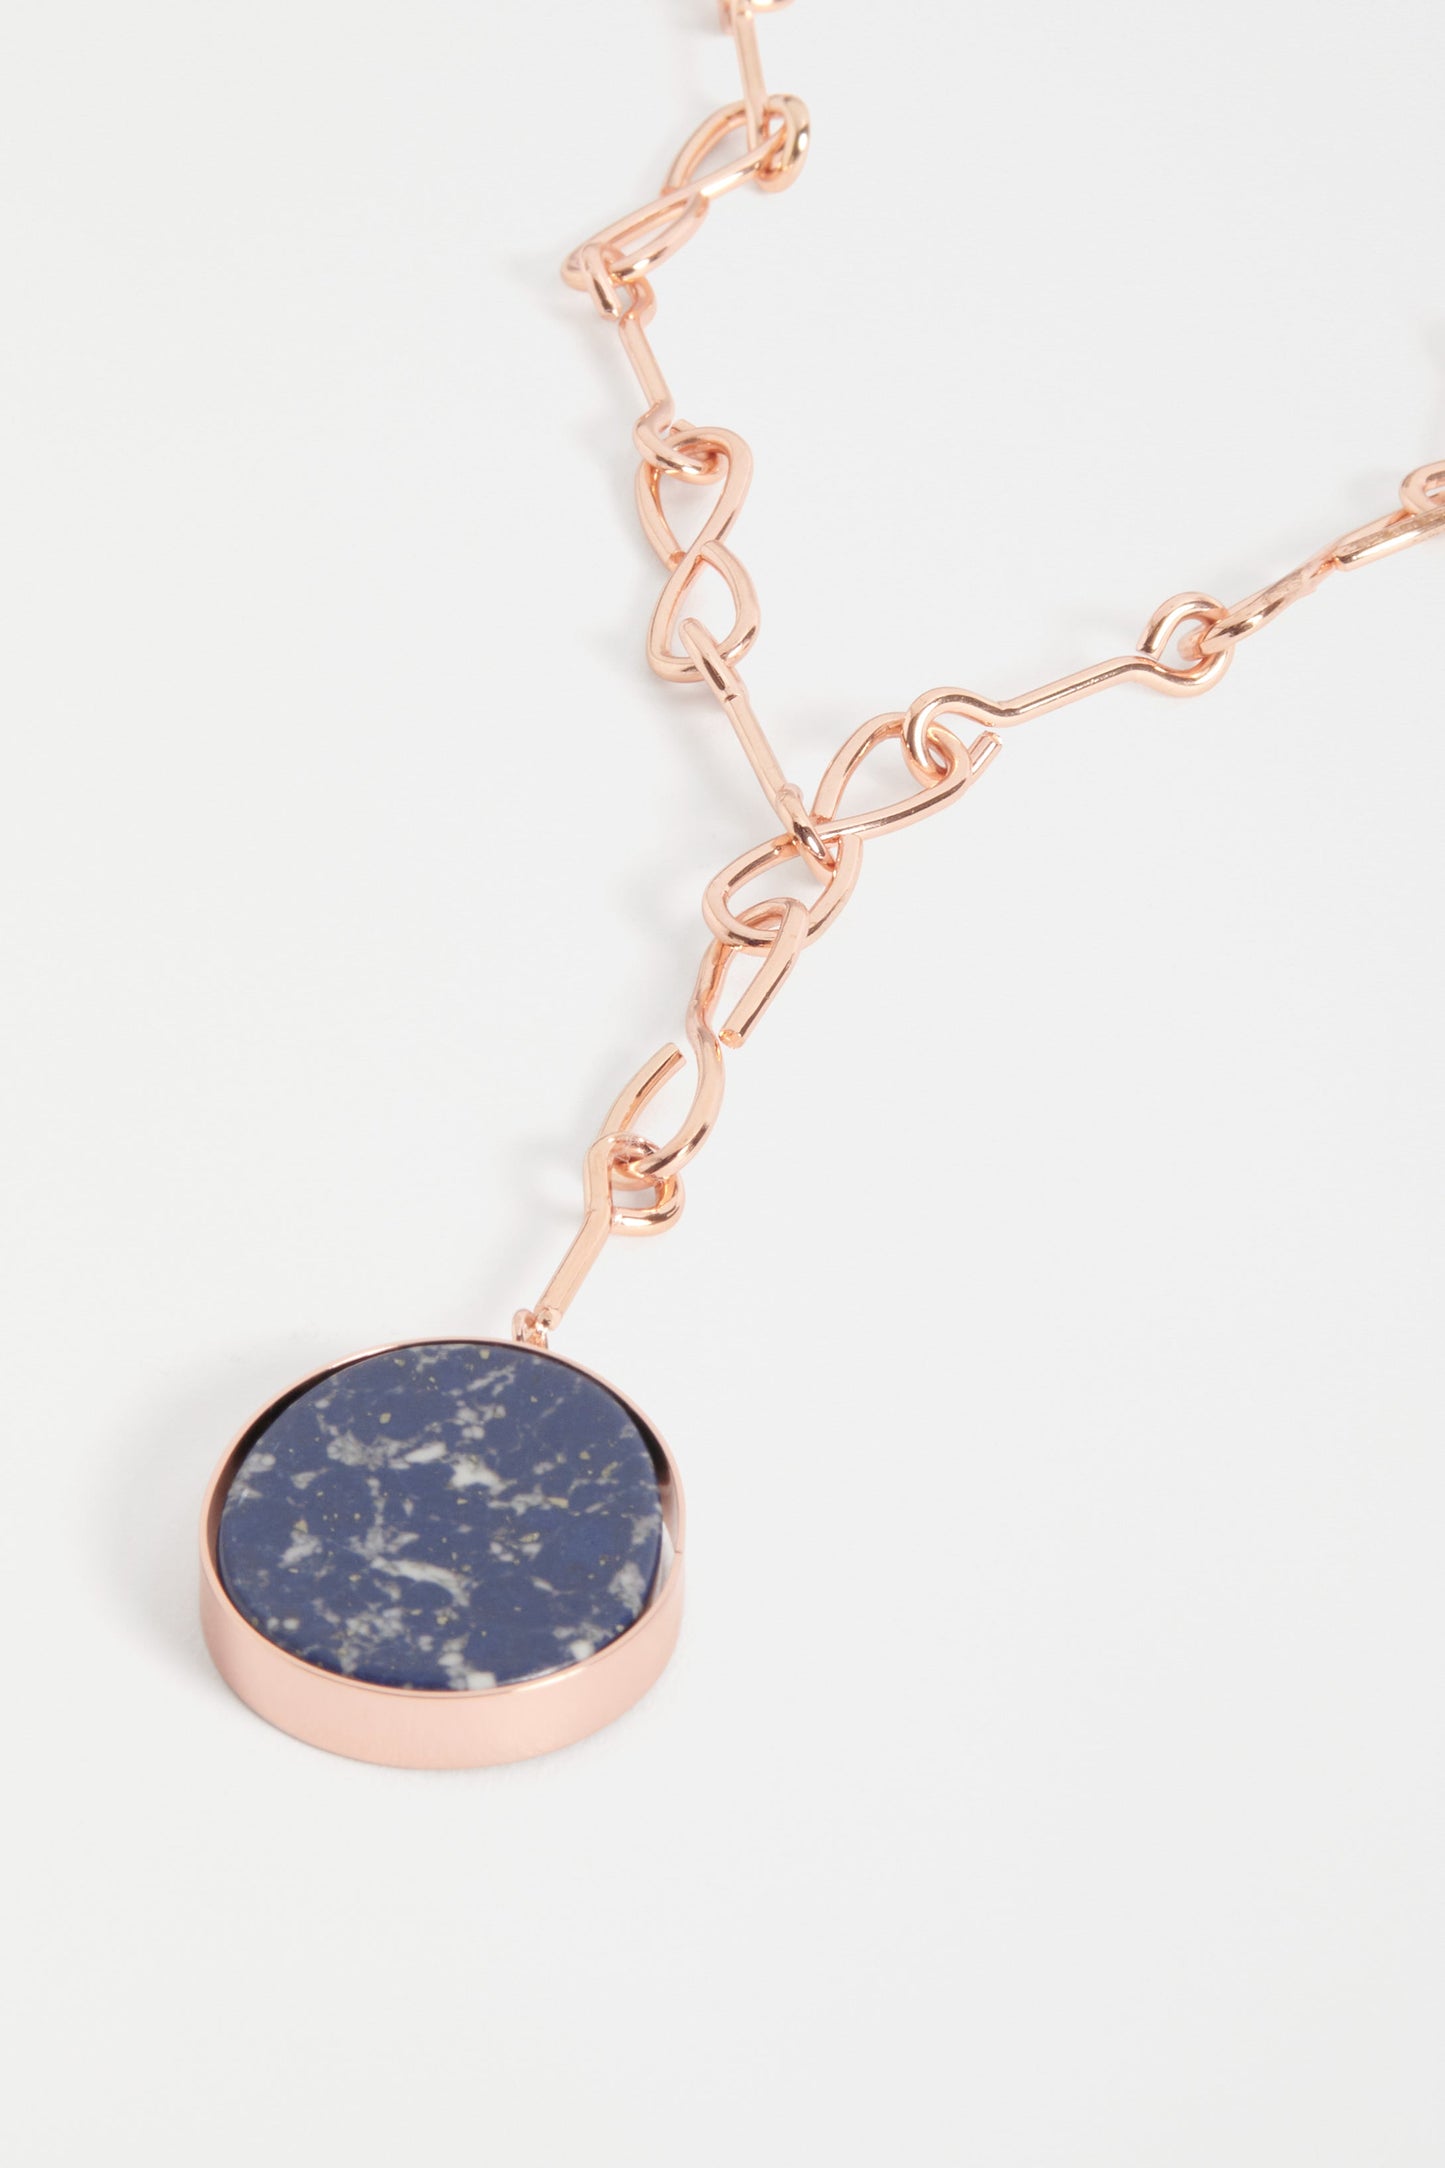 Kriis Gold Chain with Stone Pendant Necklace detail DEEP BLUE